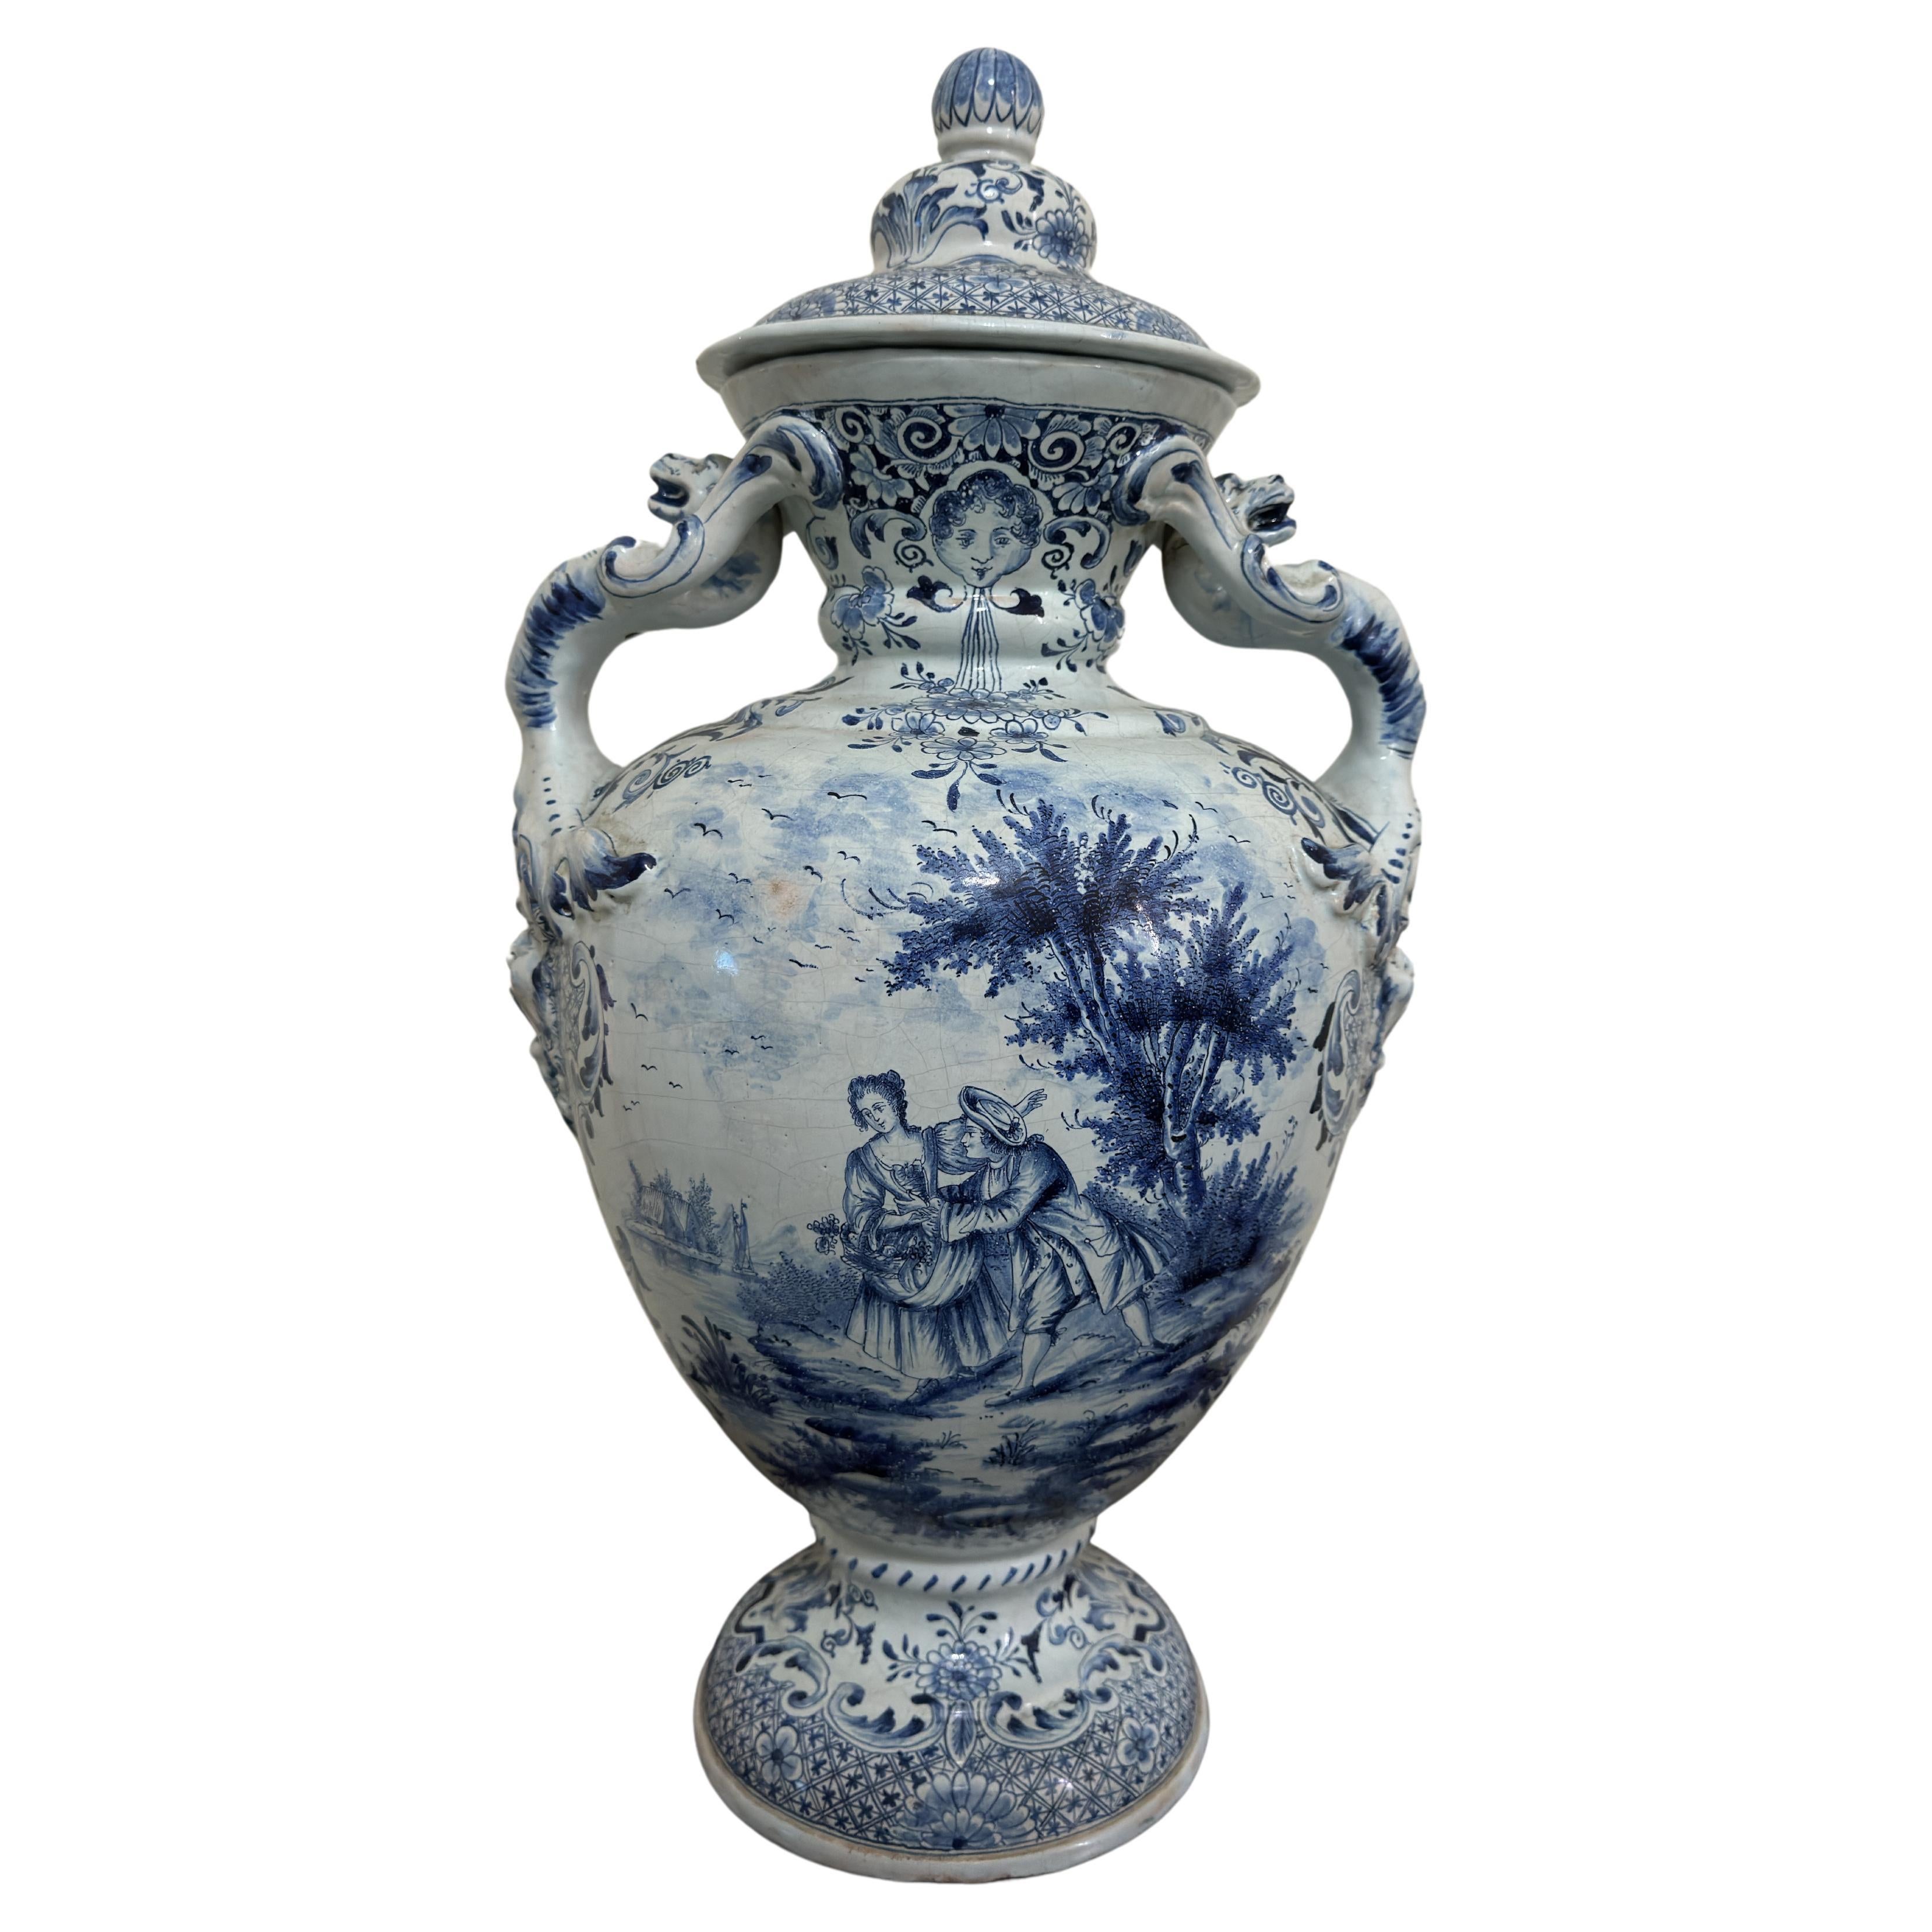 18th Century Large Delft Urn / Vase with Handles